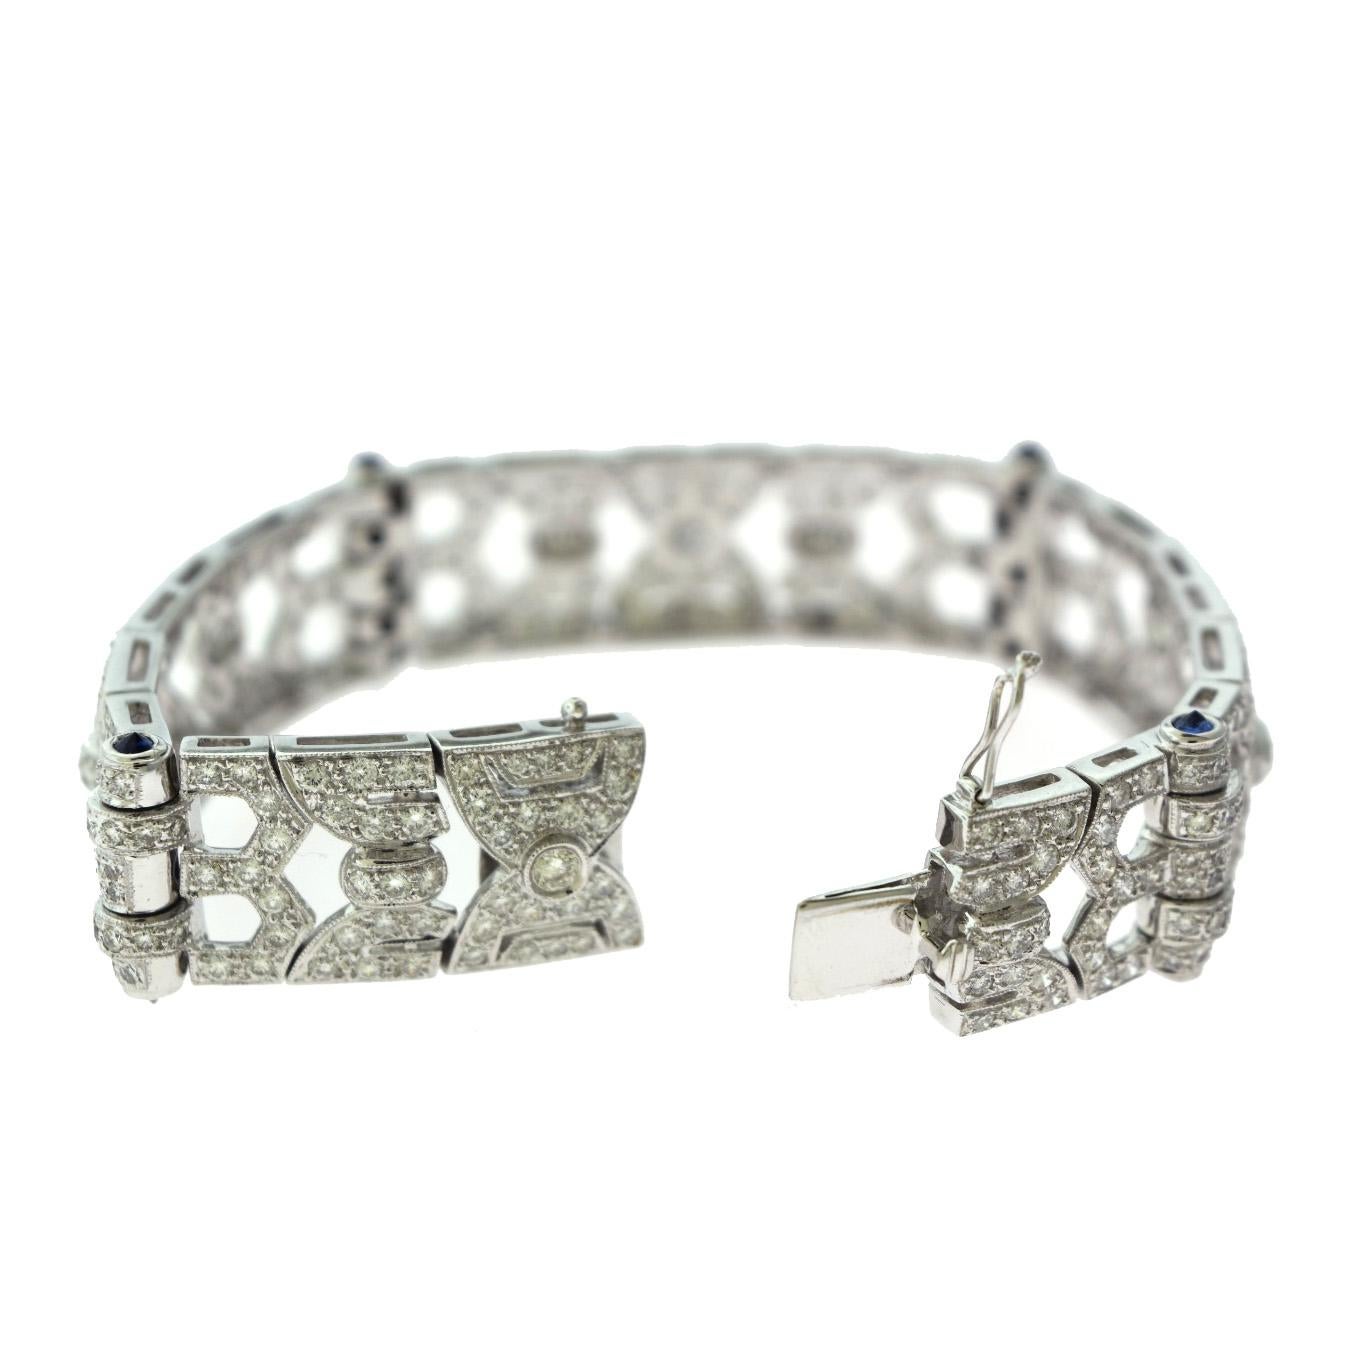 Art Deco 12 Carat Diamond Studded Bracelet with Sapphires in White Gold In Good Condition For Sale In Miami, FL